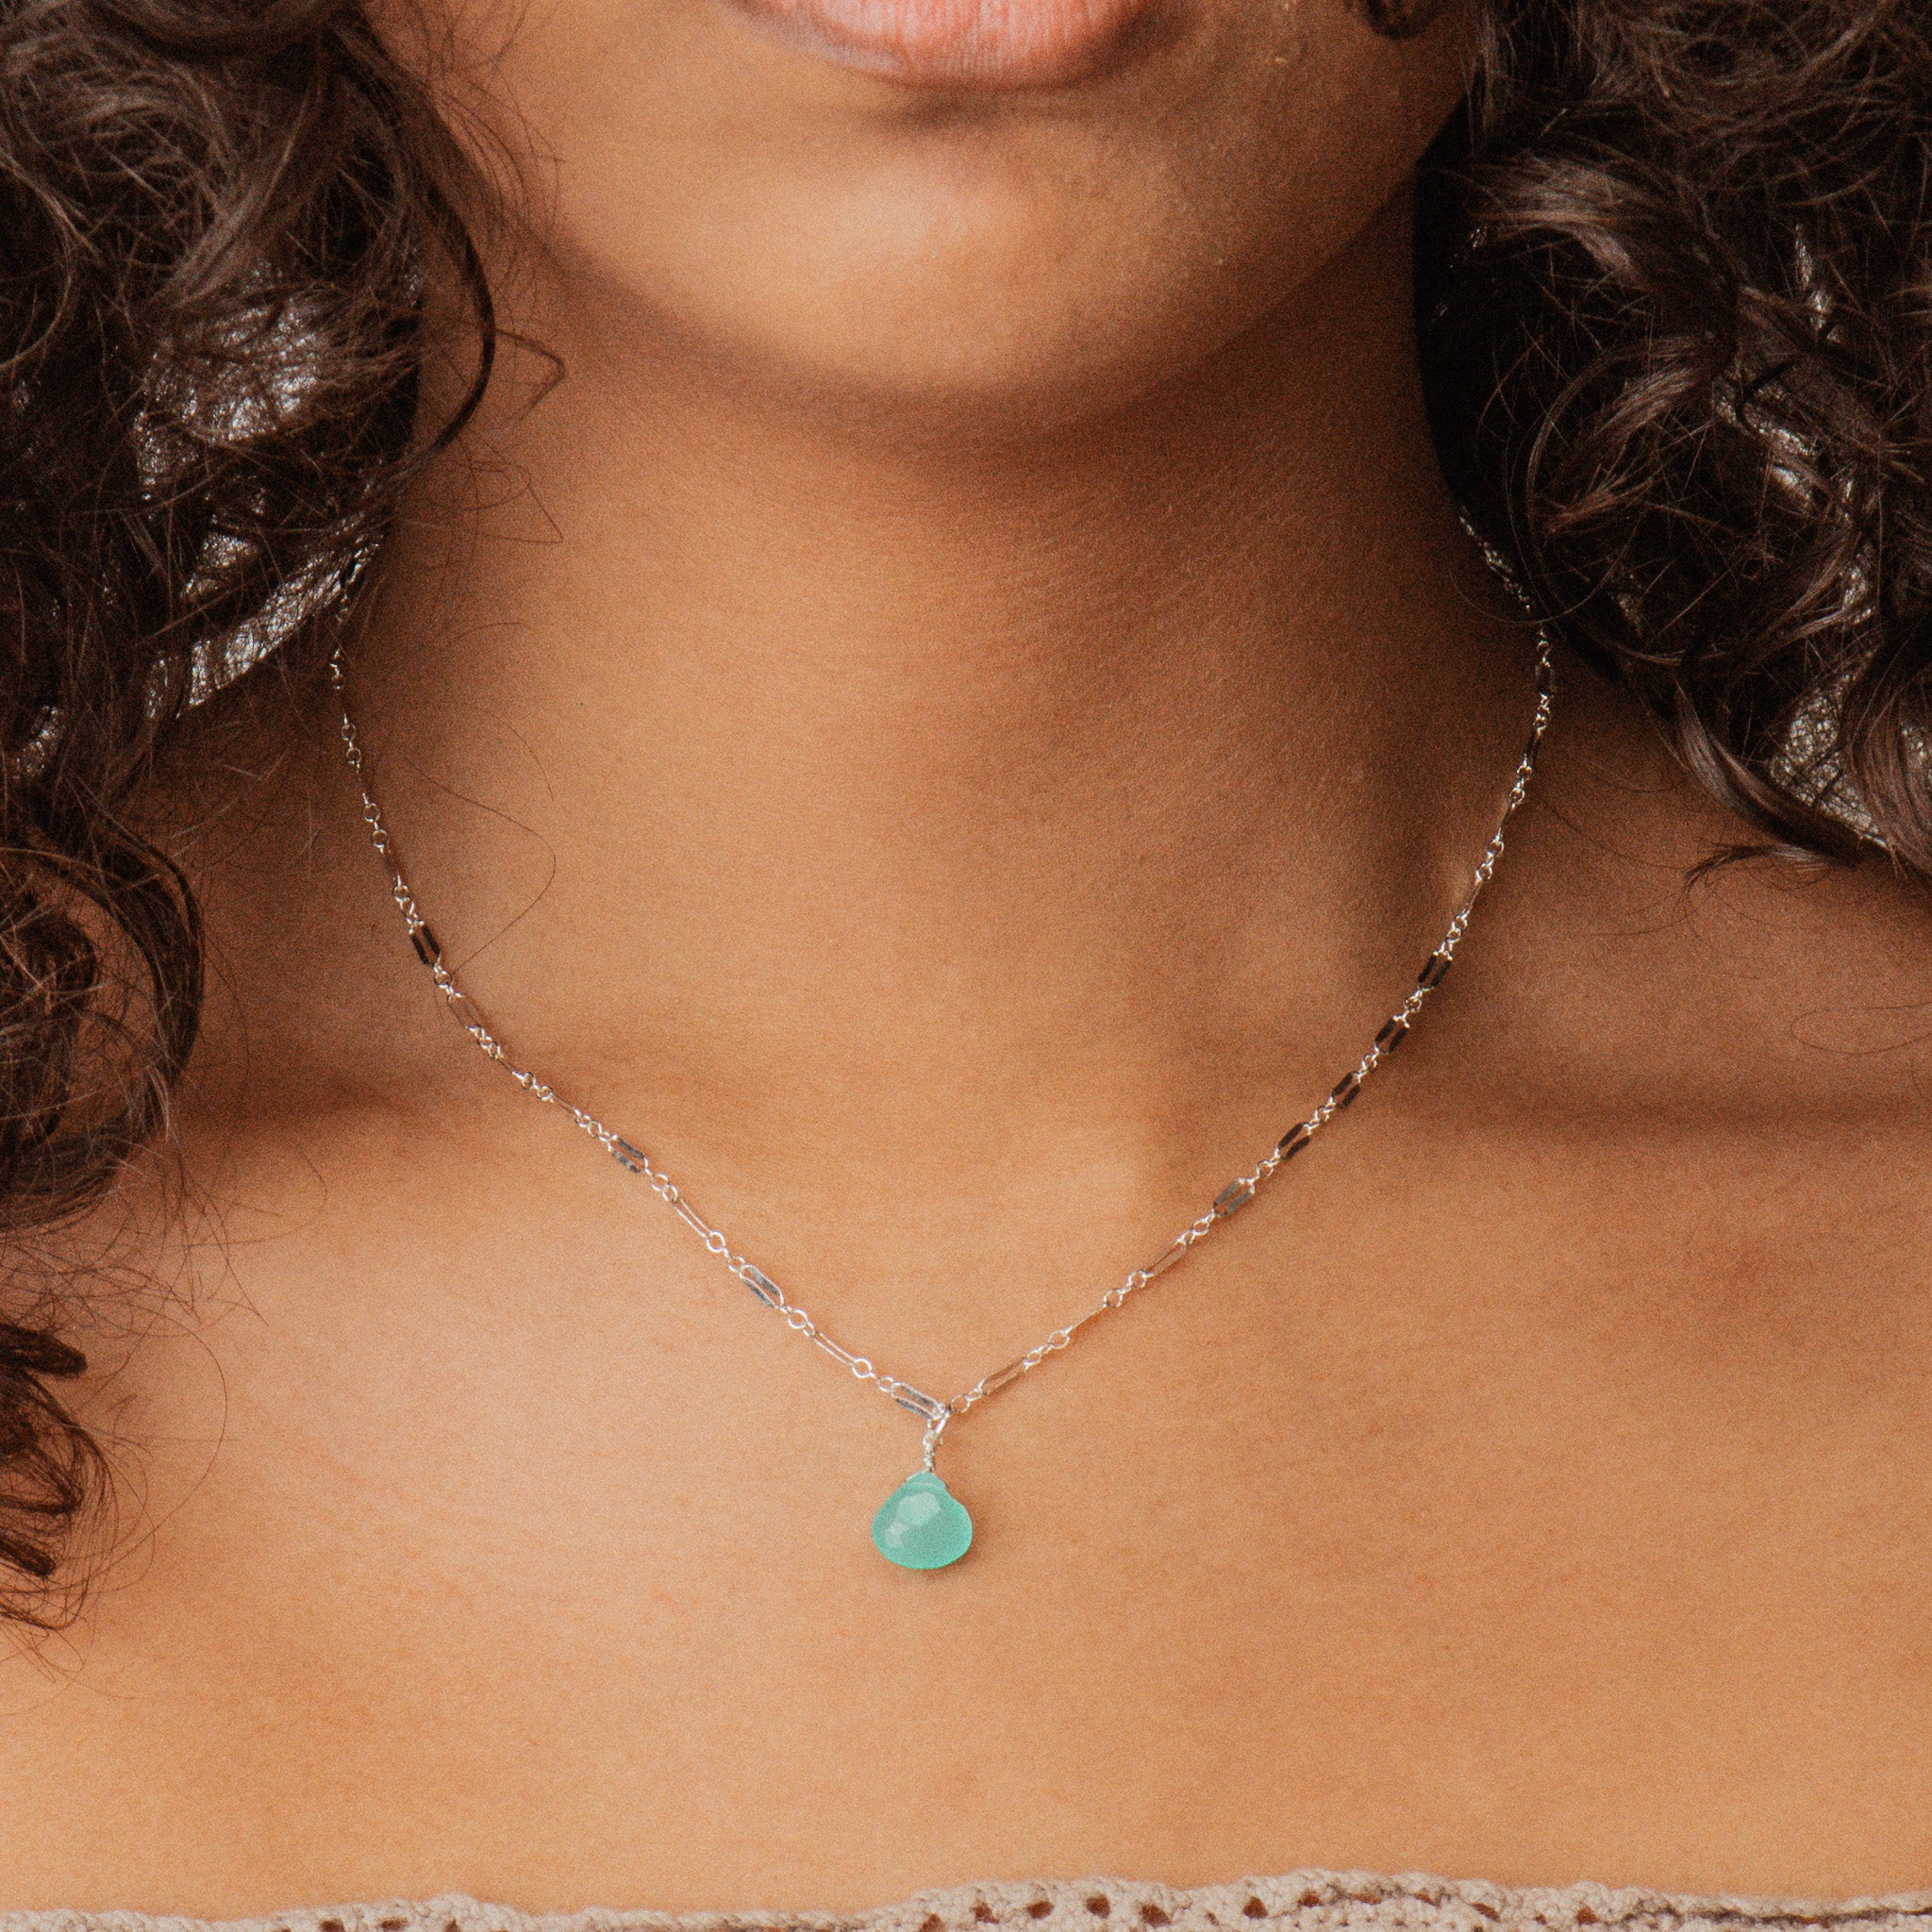 Silver Chalcedony Necklace